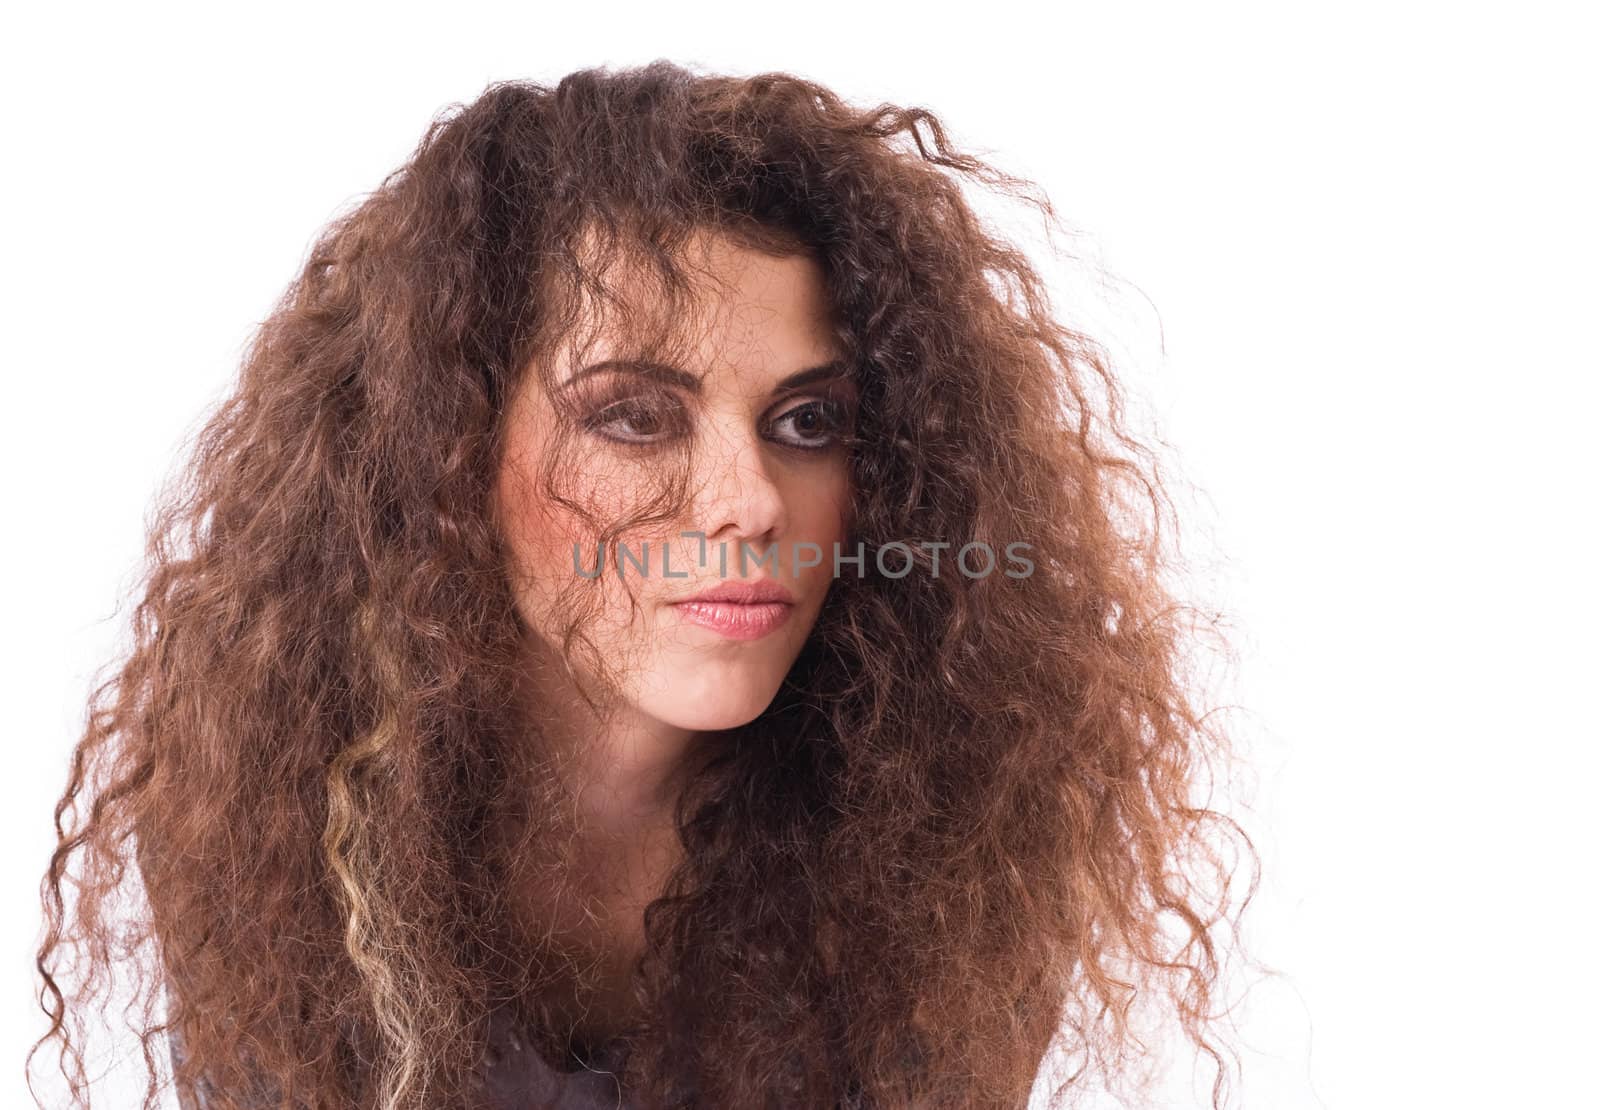 Desponded curly-headed girl portrait isolated over white